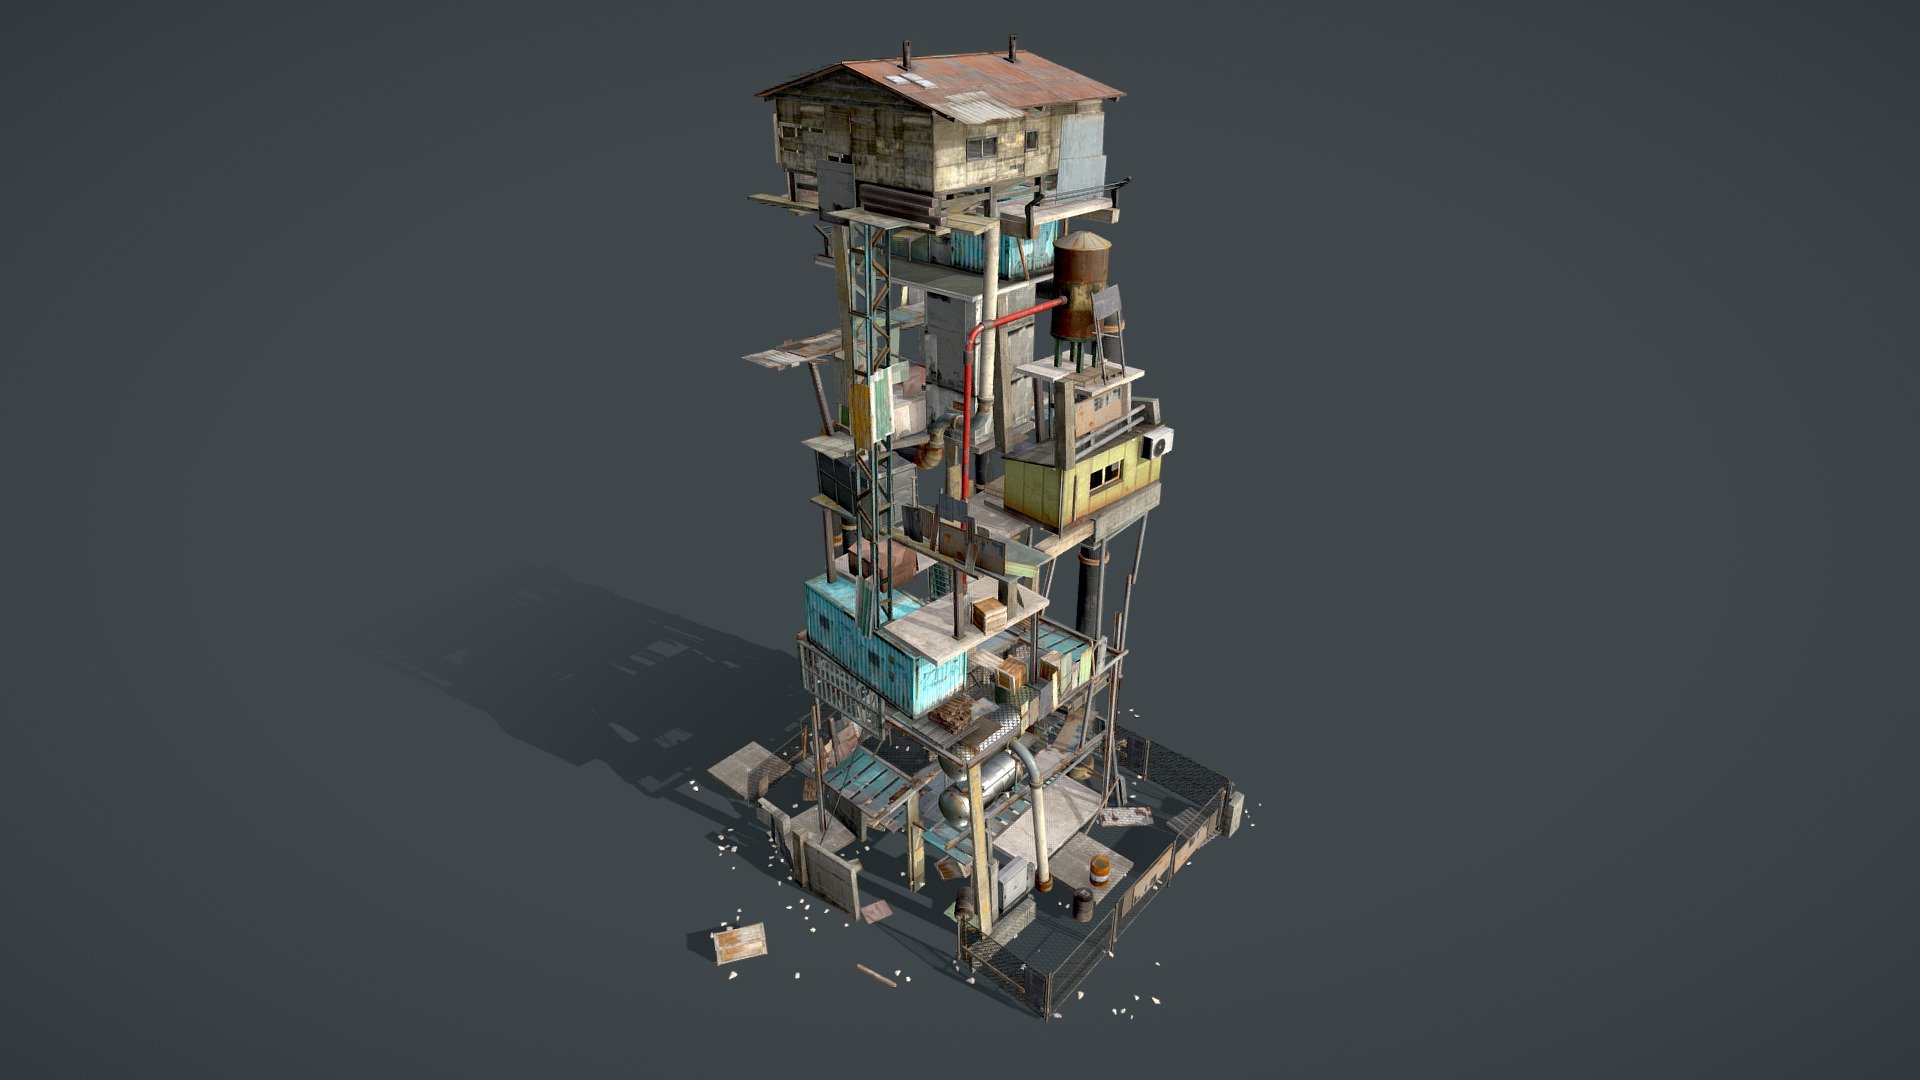 Outpost is an optimized industrial tower and modular sets.
The package includes the main outpost tower and separate .fbx meshes that can be used to build new structures.

The preview uses low resolution textures.

After purchase, be sure to download the separate Outpost.zip file which includes:




322 models (minimum 2 - maximum 3000 triangles)

279 textures (albedo, normal, roughness, metallic, ao) - mainly 1k-2k resolution

Additionally, .zip file includes the Unity 2021.3 scene with




123 prefabs

80 materials (PBR built-in standard pipeline)

 - Outpost - Buy Royalty Free 3D model by l0wpoly 3d model